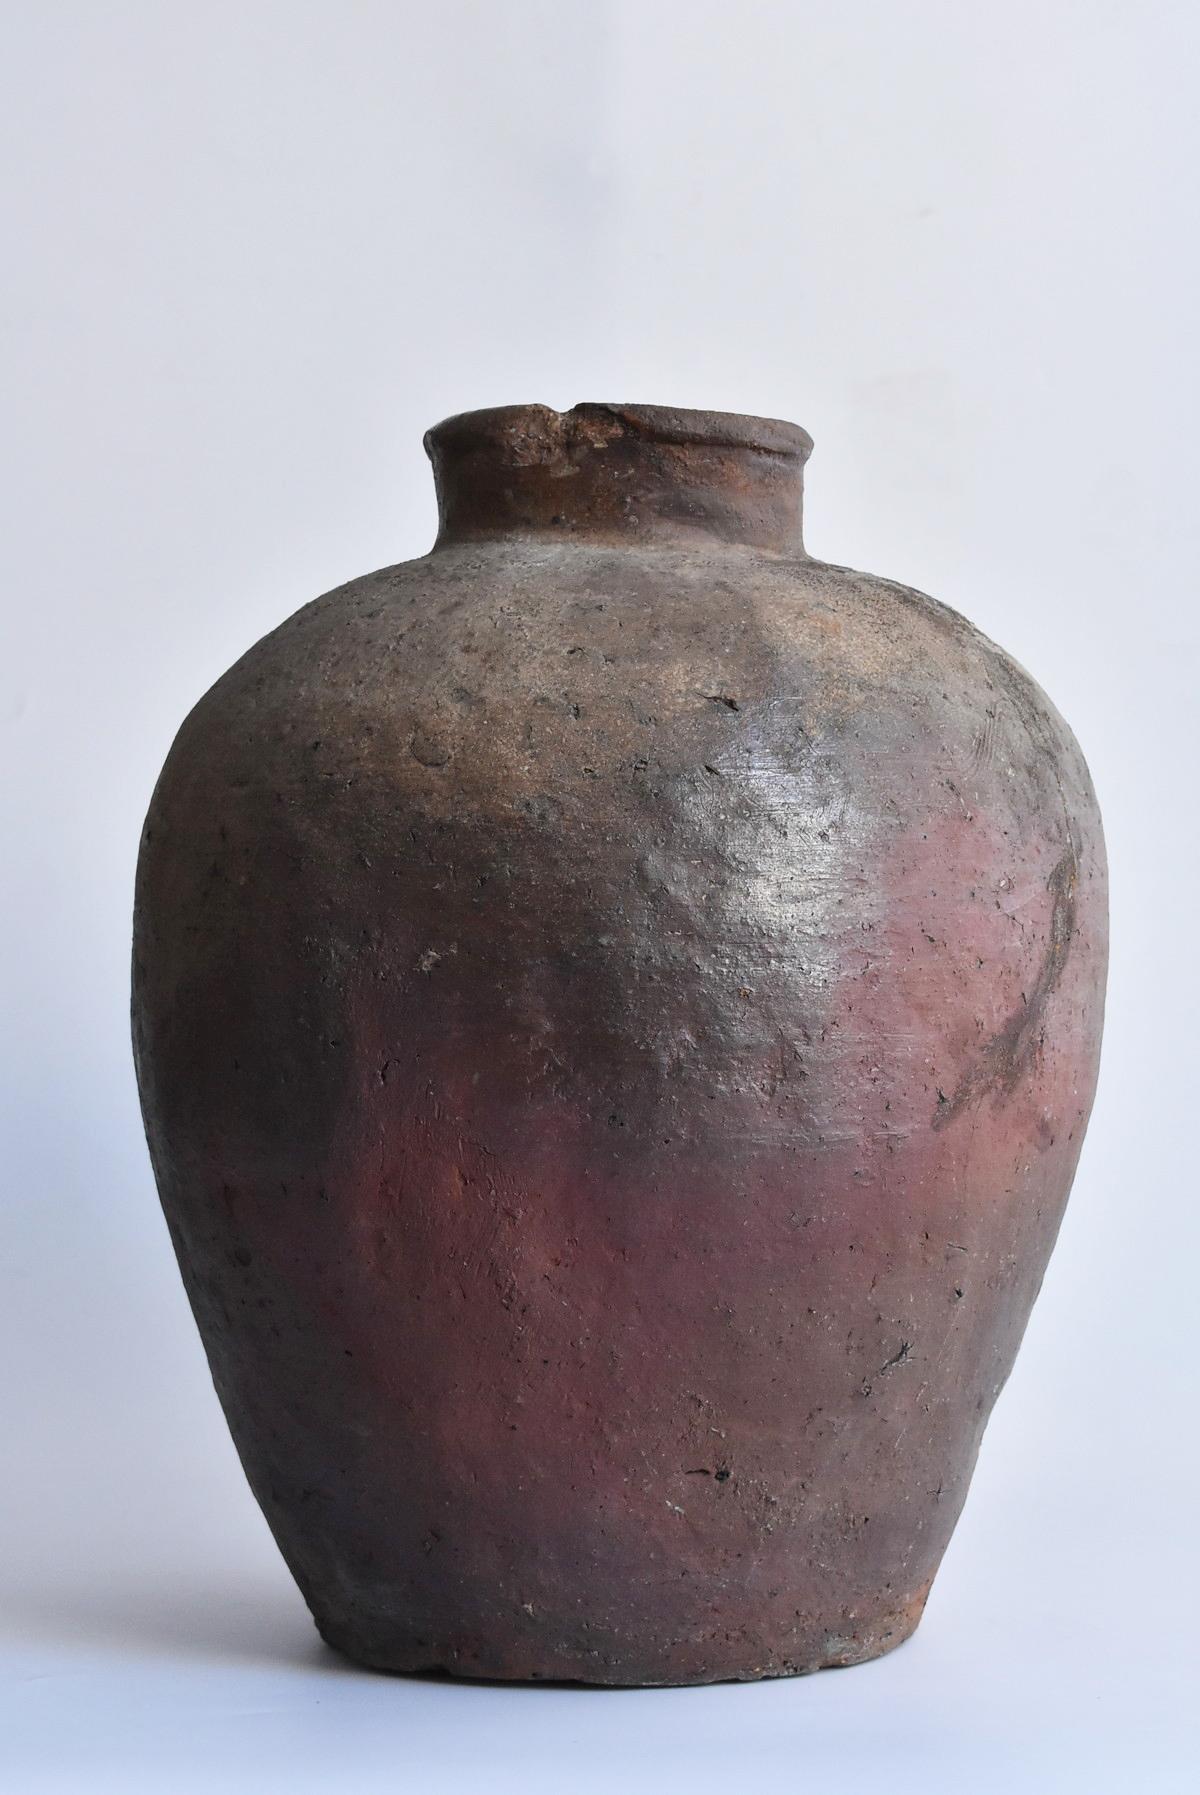 We Japanese introduce unique items with unique aesthetics, purchasing routes, and ways that no one can imitate.
From the characteristics of the shape and the pattern of the waves, I think it is an old Japanese Bizen ware vase from the 15th-16th